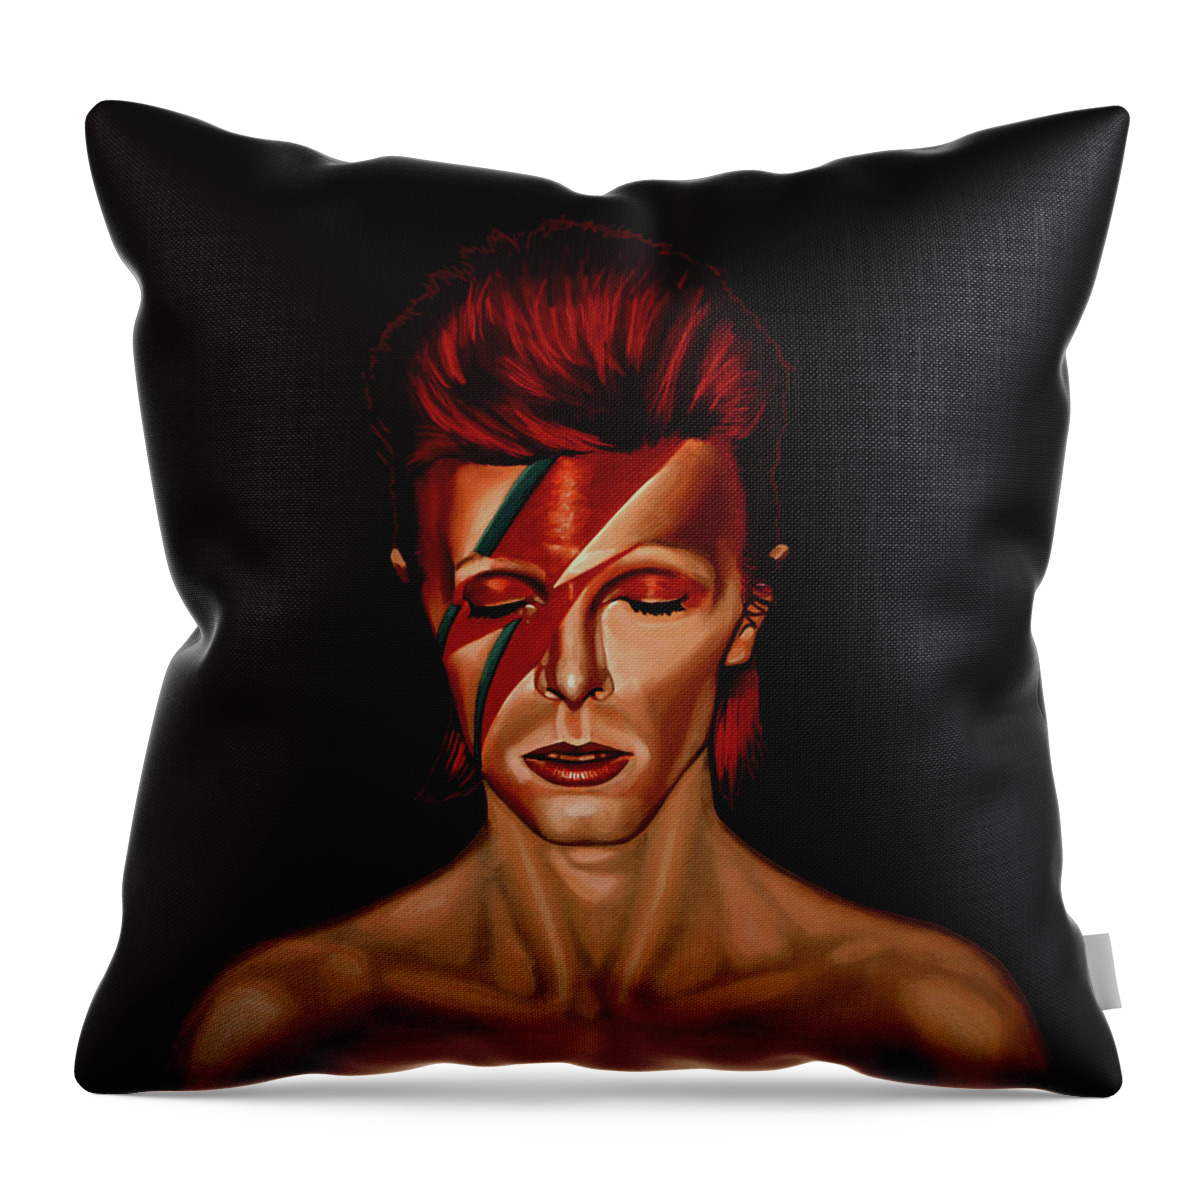 David Bowie Throw Pillow featuring the painting David Bowie Aladdin Sane Mixed Media by Paul Meijering